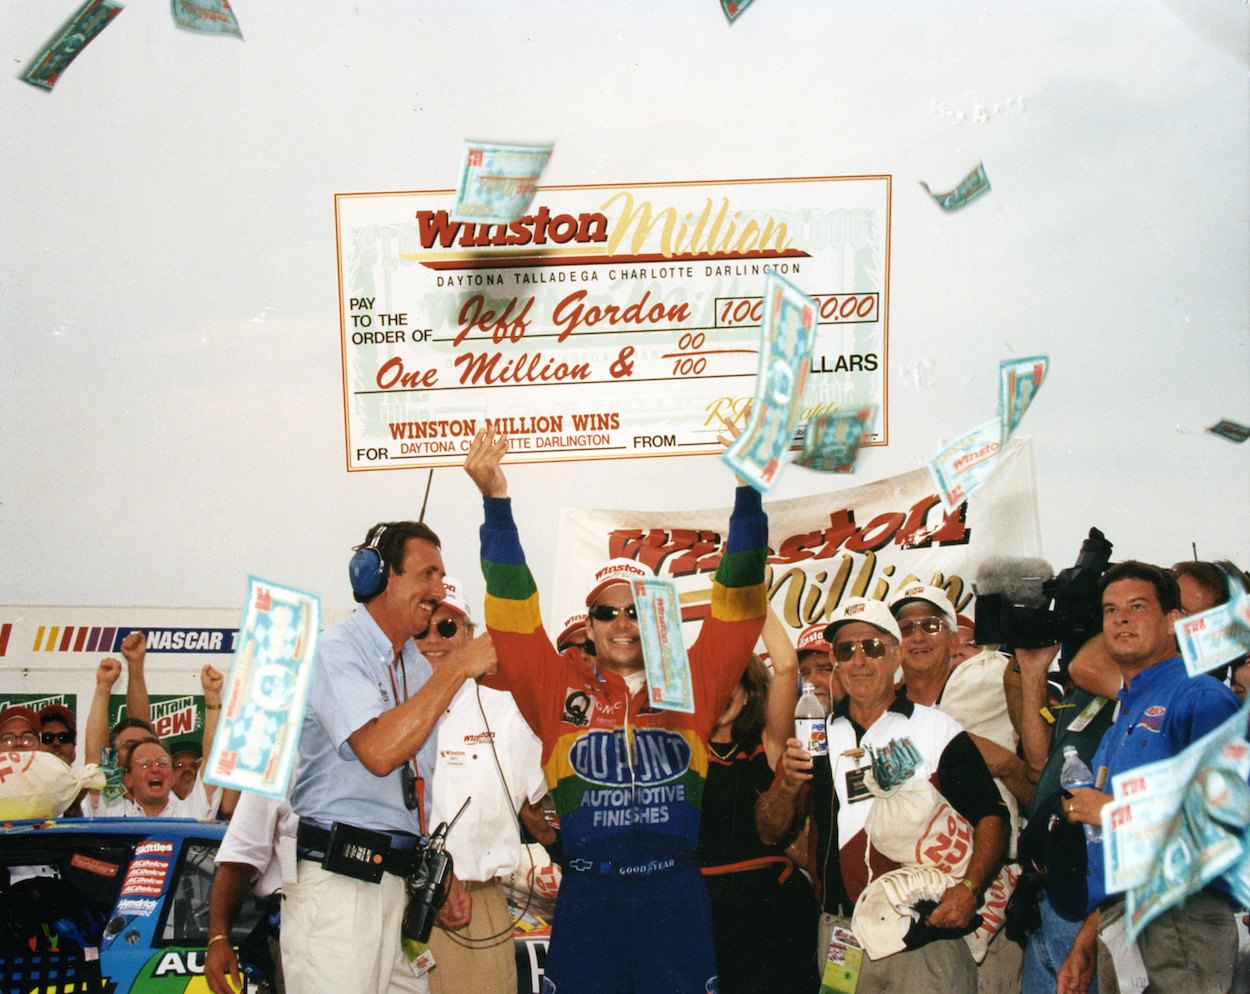 Jeff Gordon earned a historic $1 million payday at Darlington in 1997 thanks to one of the most famous blocks in NASCAR history.